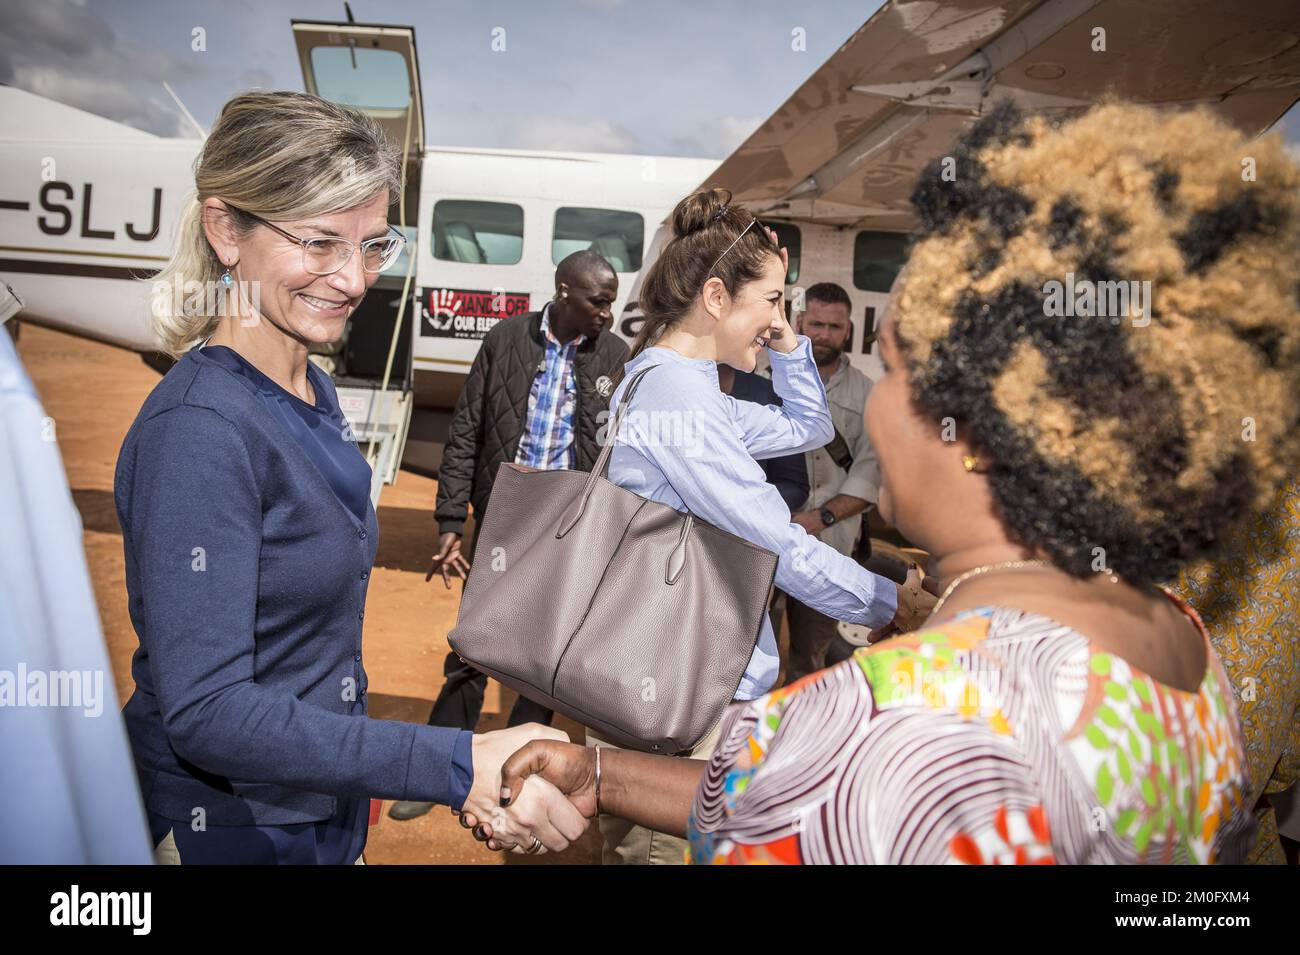 On November 27th and 28th 2018 HRH Crown Princess Mary visited Kalama in Kenya along with the Minister for Development Ulla Tørnæs. They arrived at the Kalama Airstrip in Samburu Country on November 27th and were greeted by prominent members of the Kalama societies. Hereafter they visited the Kalama Conservancy where they met with local women who have benefited from Danish support to create small sustainable businesses. The whole visit has as a special focus the promotion of women's rights and economic independence through local projects. Stock Photo